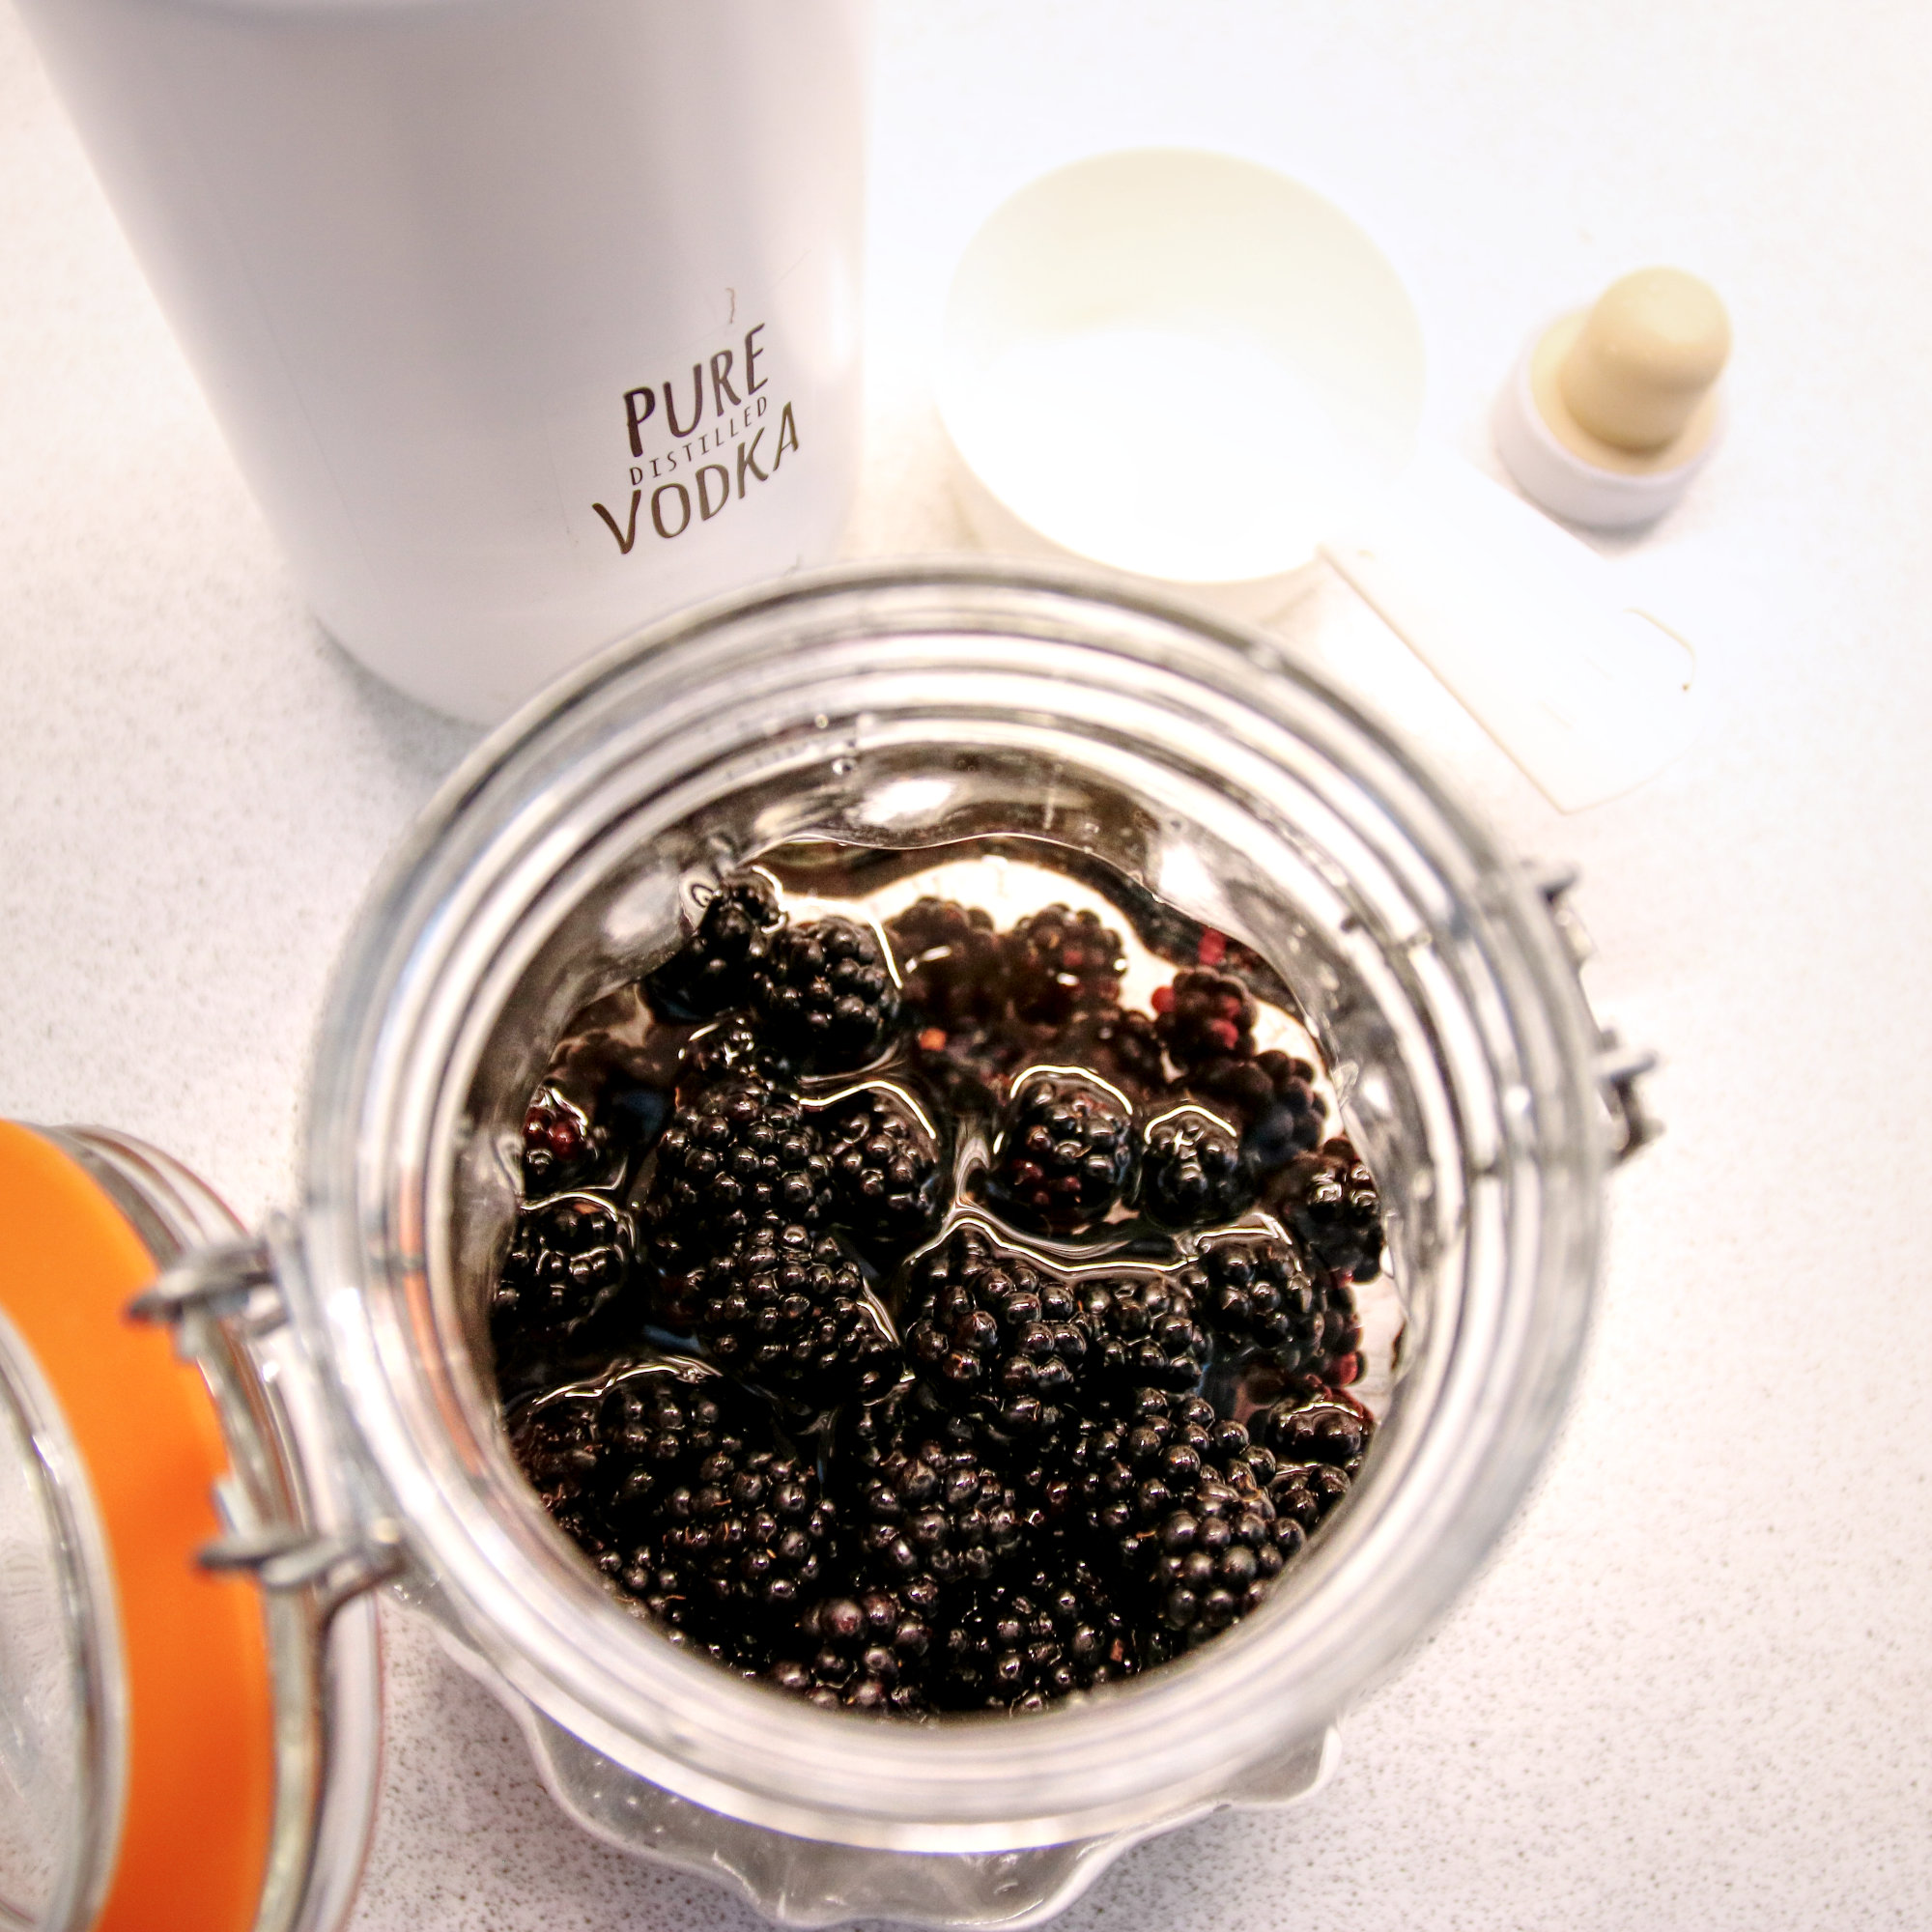 Step 1 - Add the vodka to the blackberries